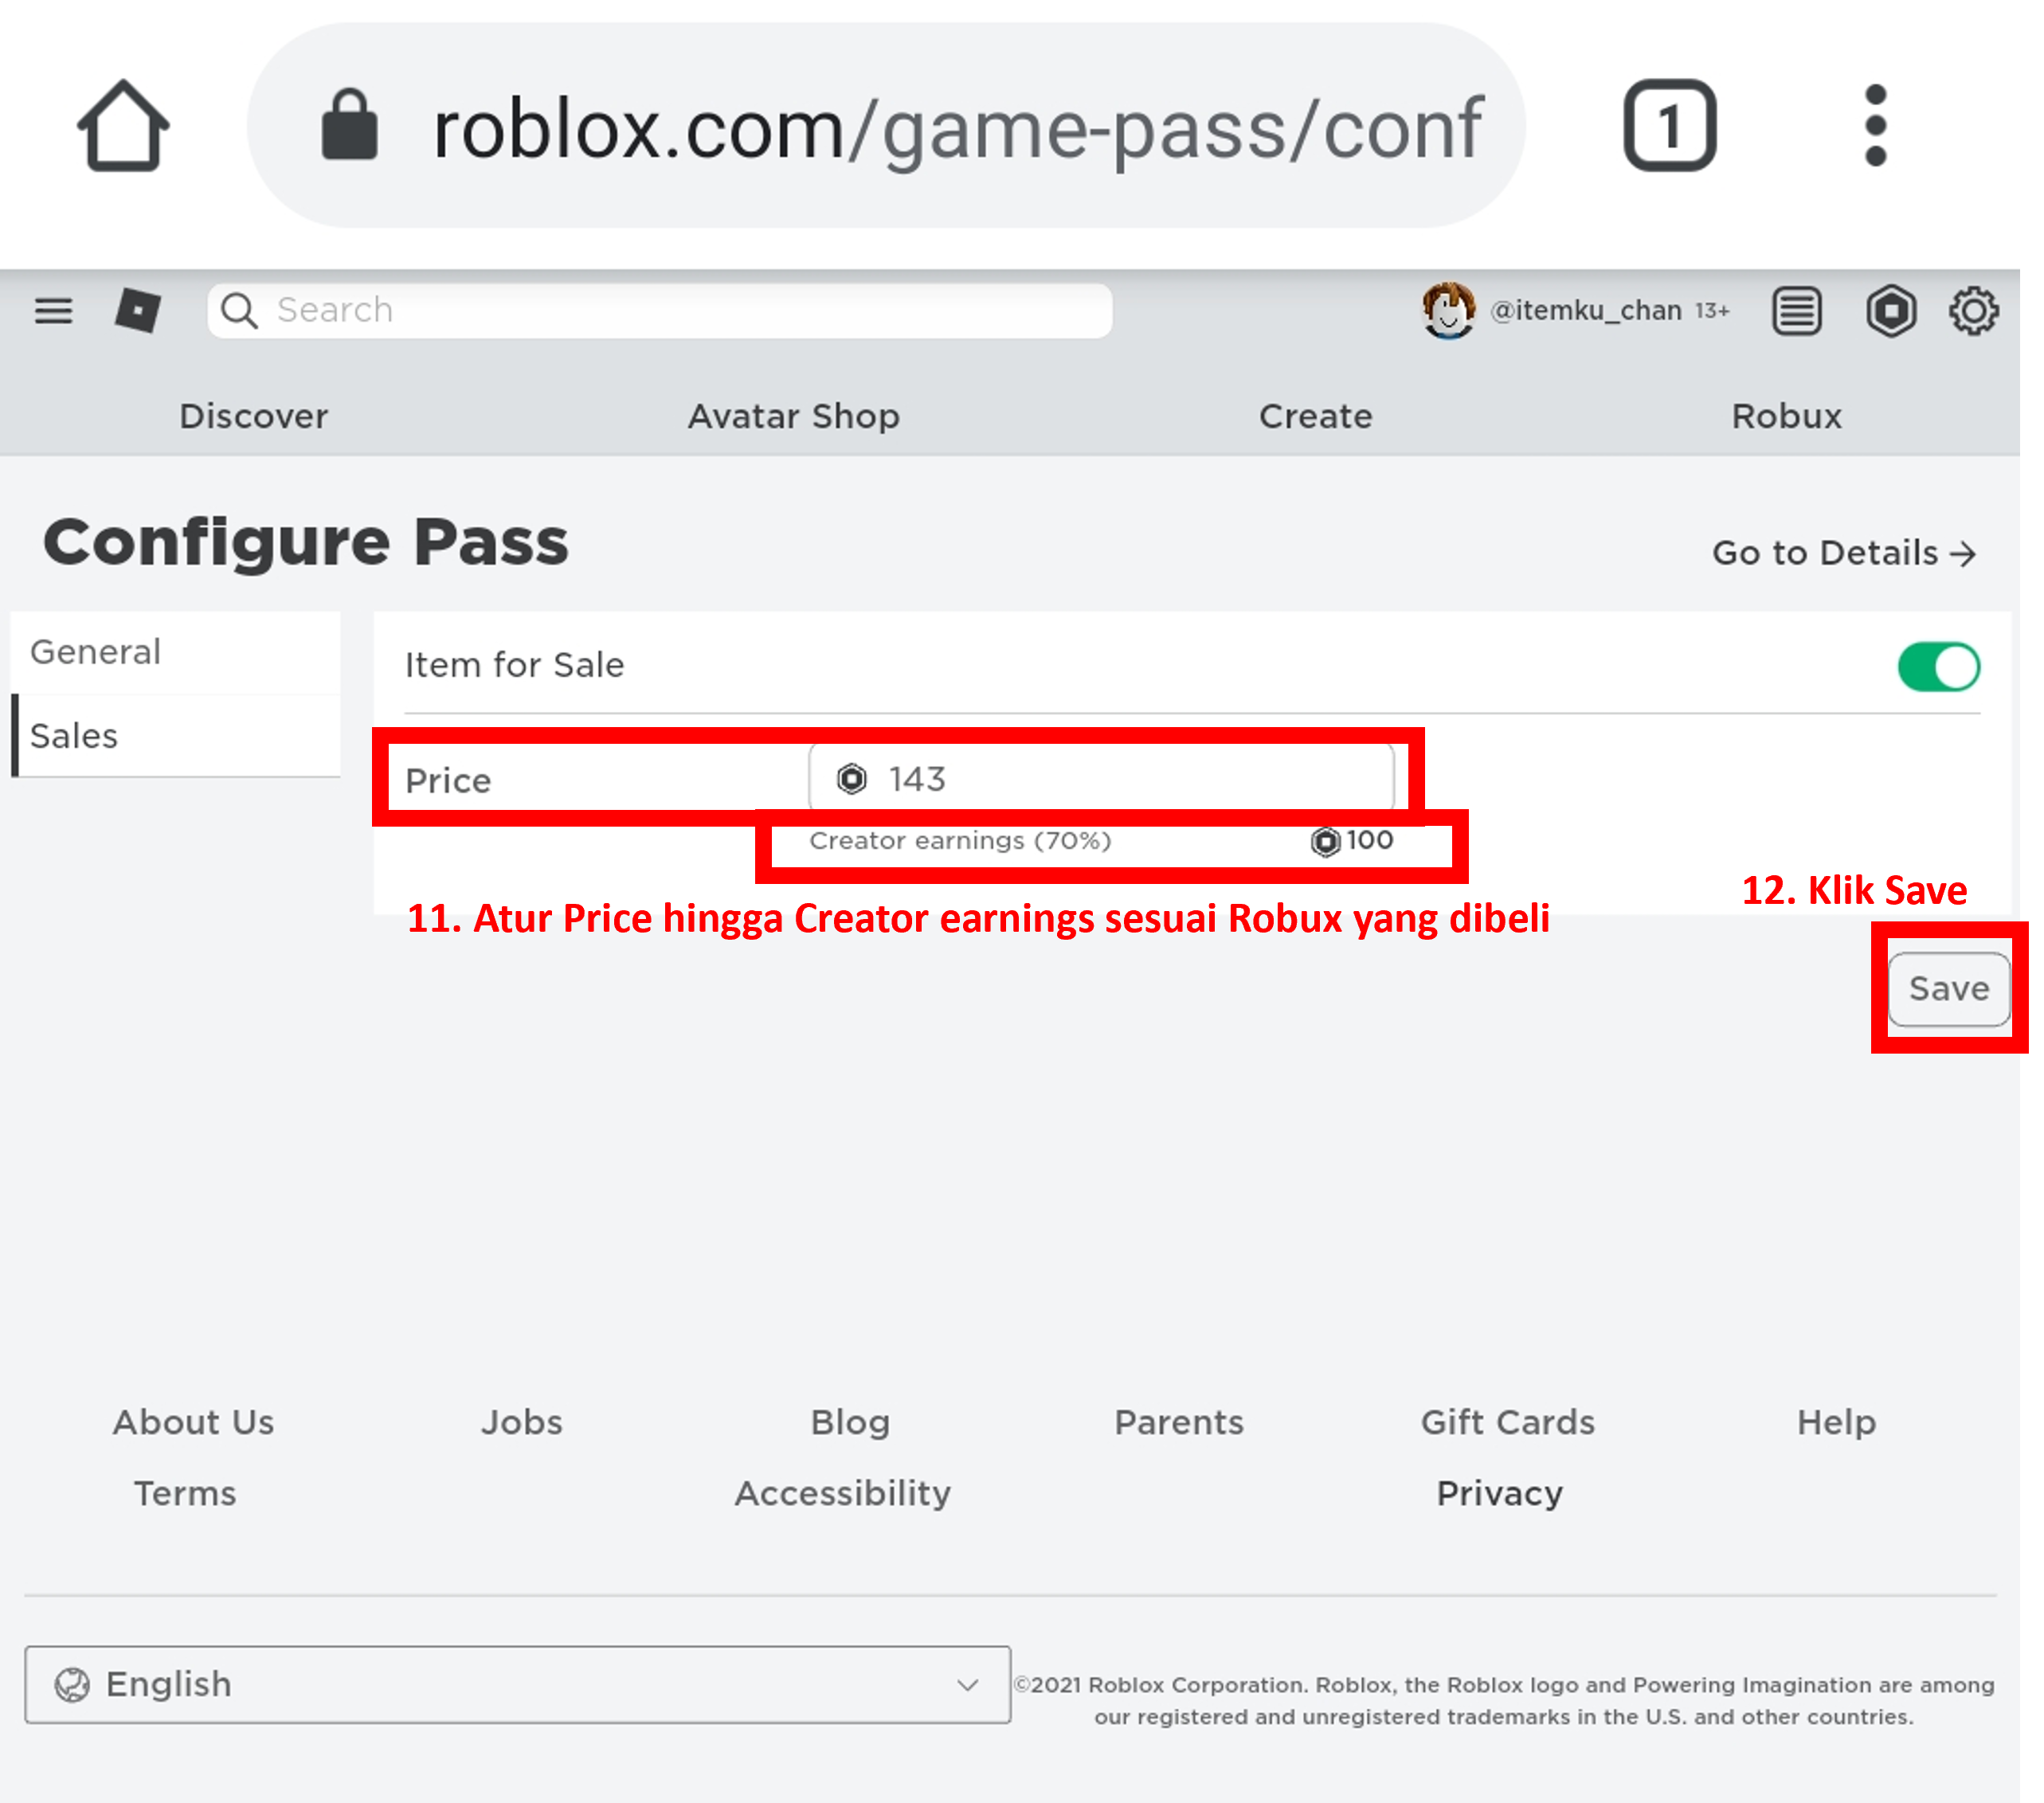 Roblox 4500 Robux Gamepass method (5 DAYS PENDING TYPE) tax covered